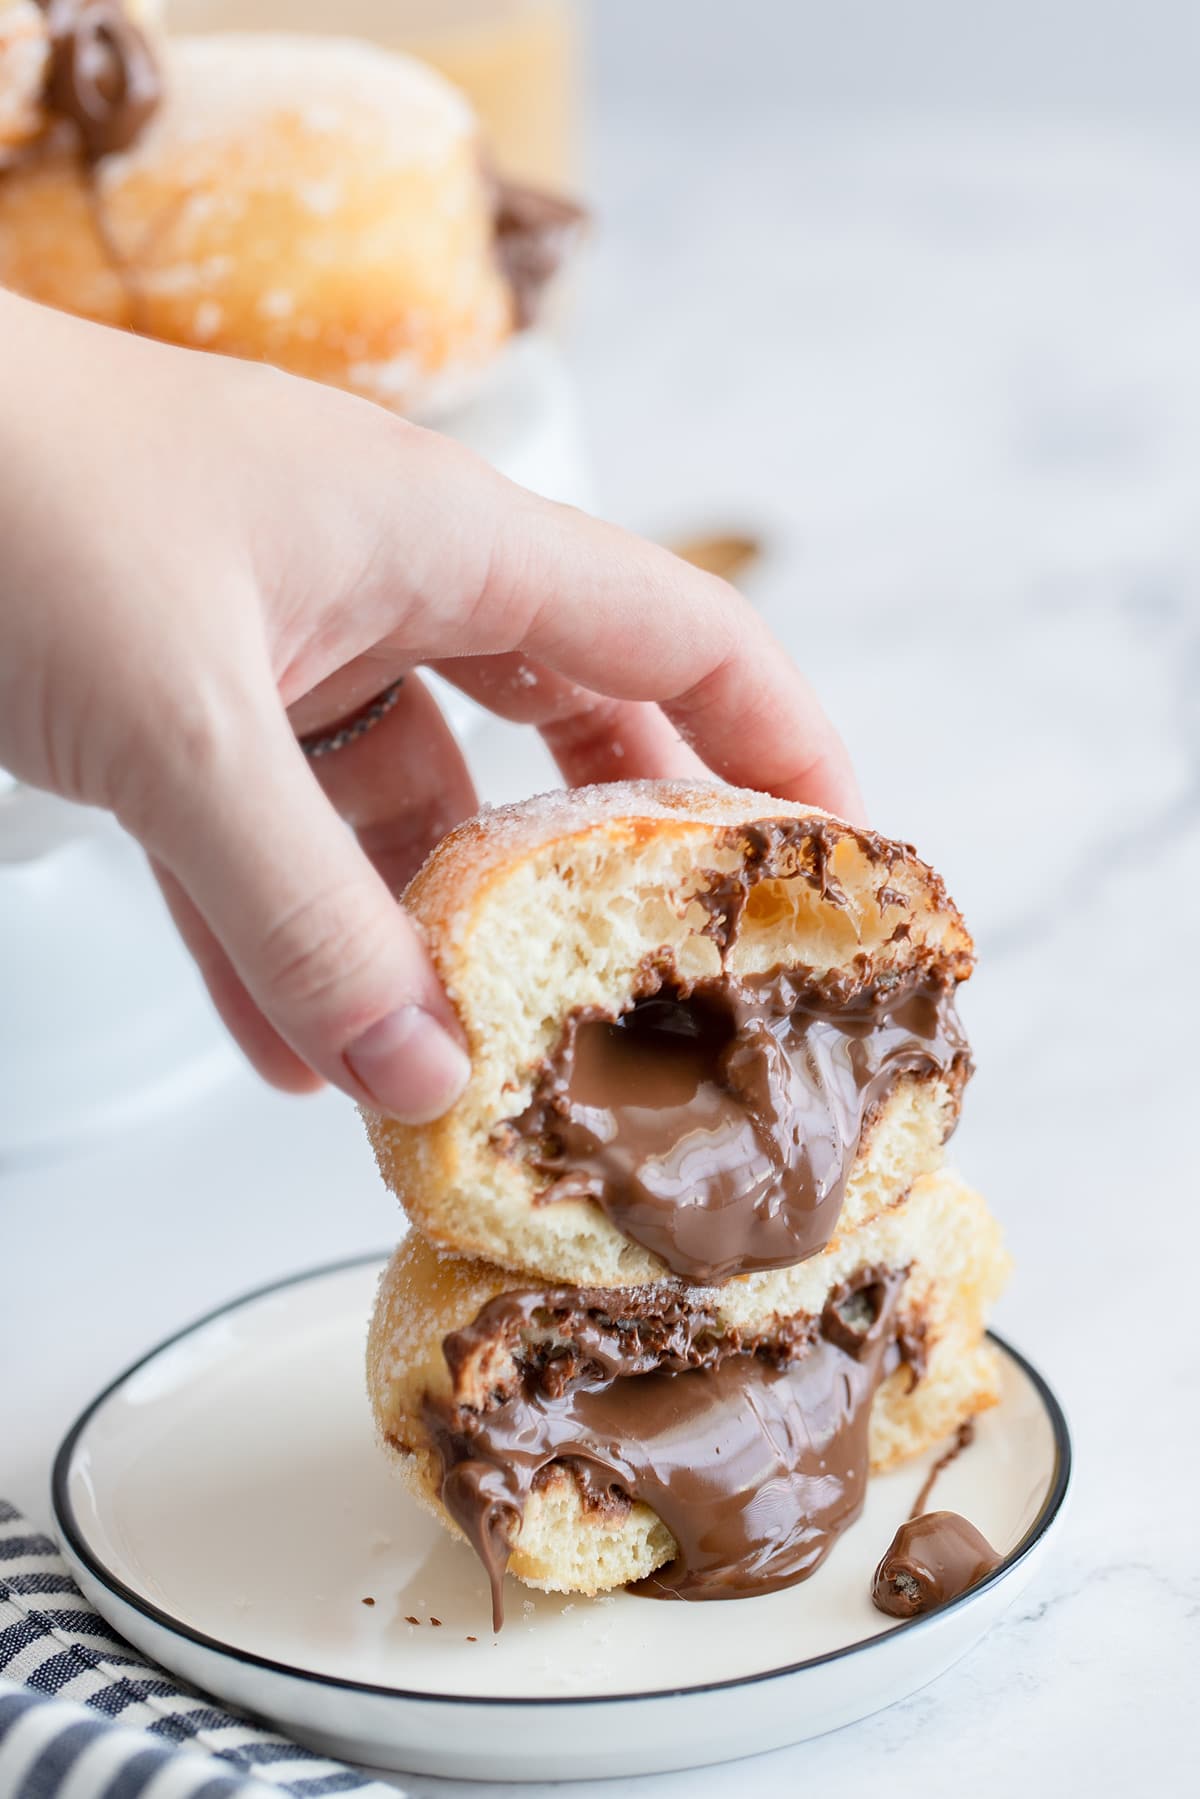 two nutella doughnuts on a small plate with nutella coming out of the donuts and a hand holding the donuts.